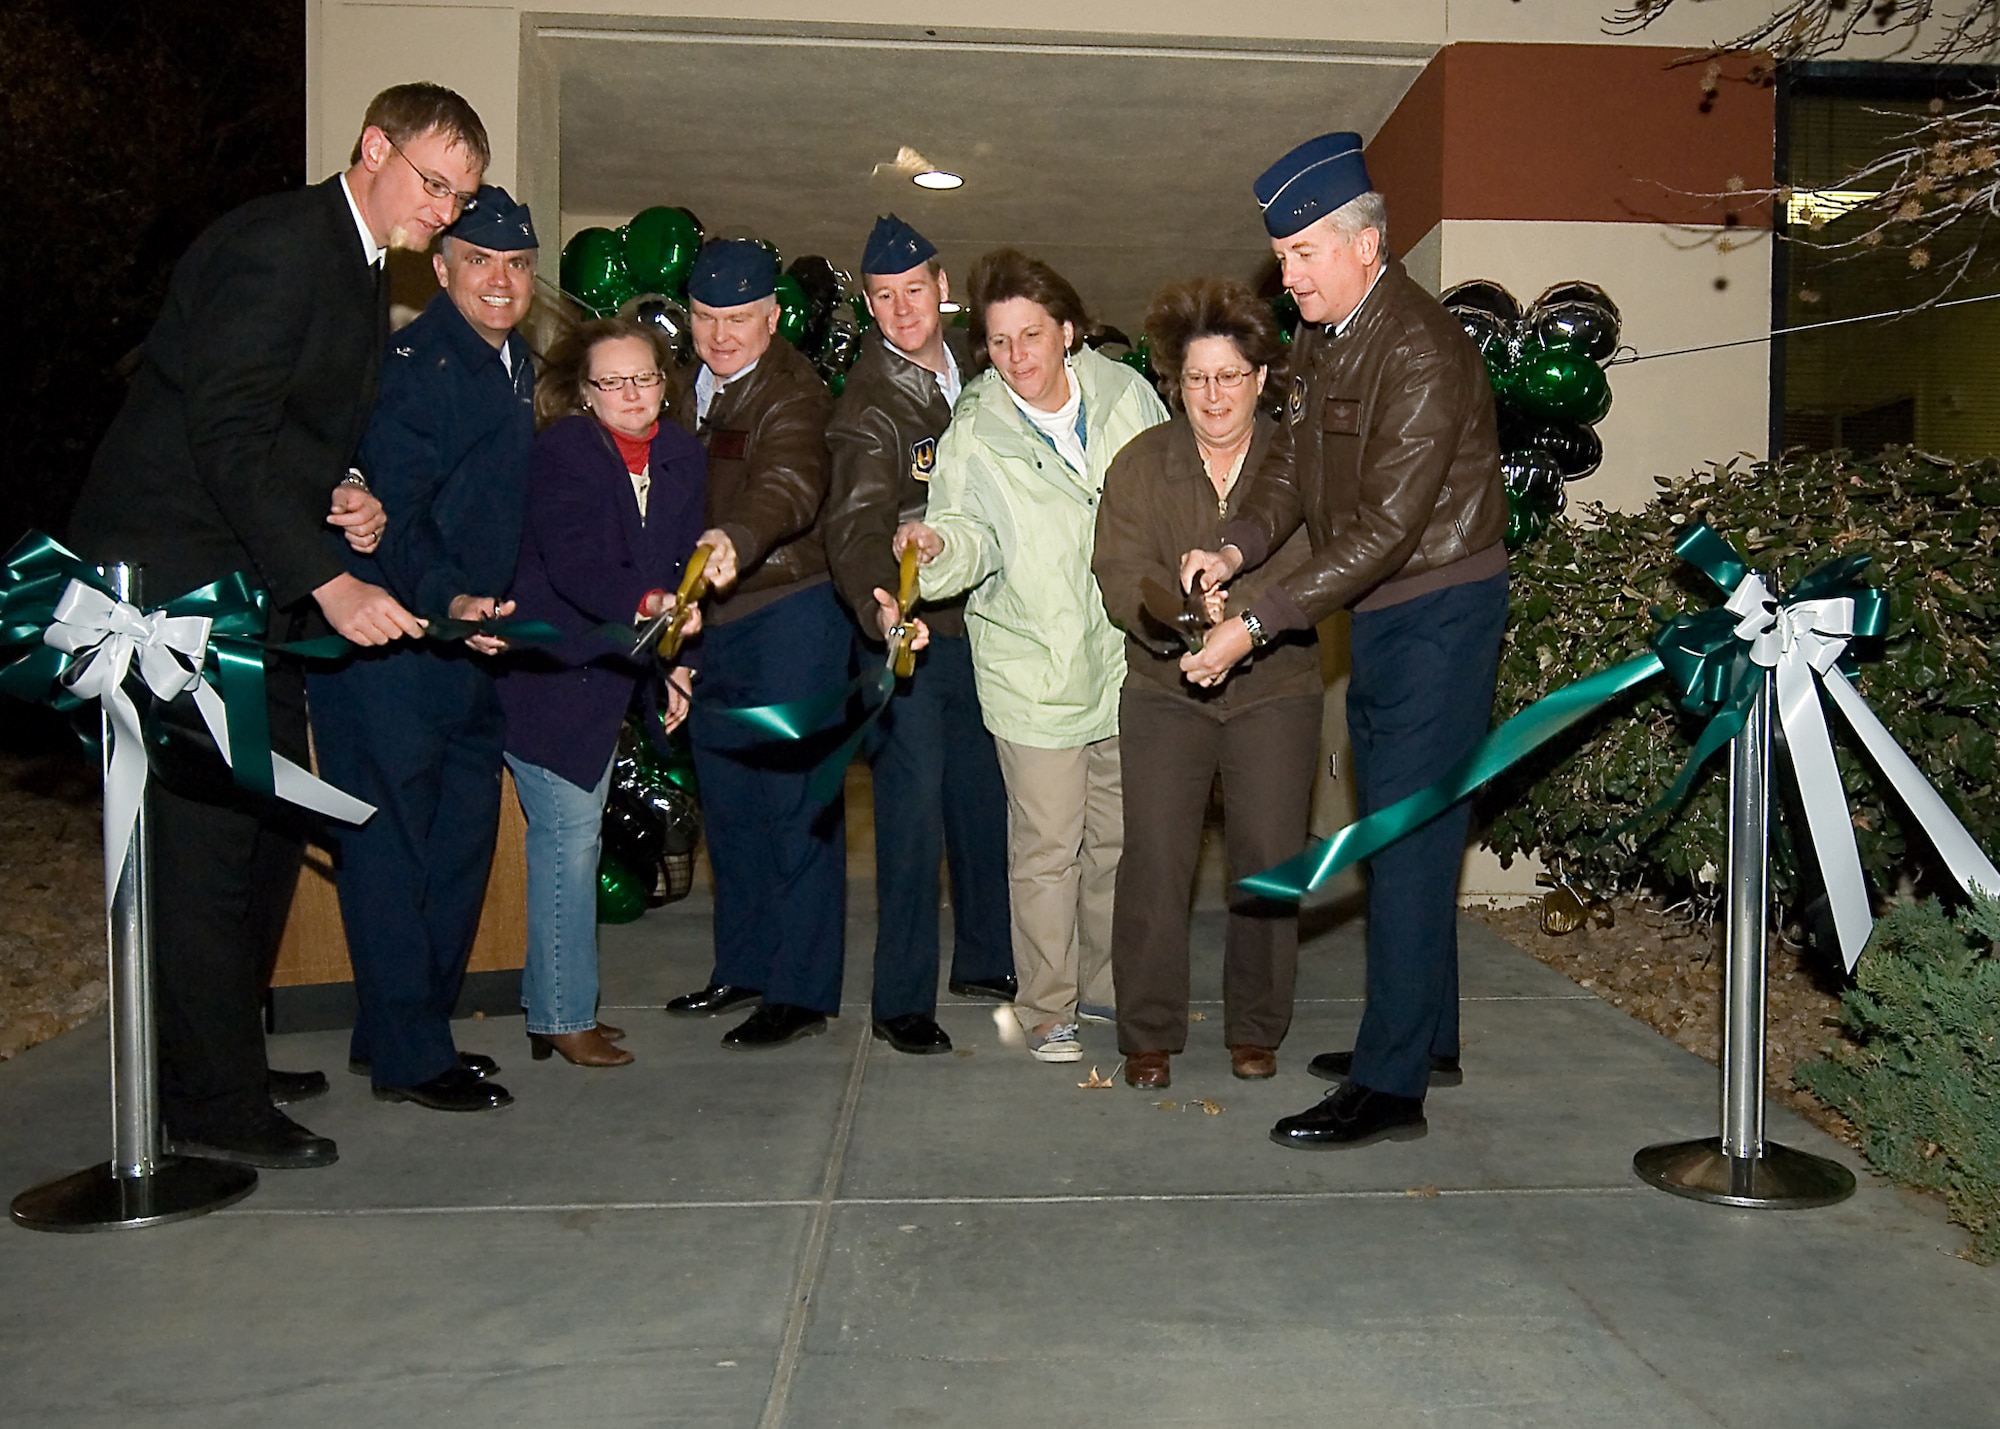 Edwards leadership and Army Air Force Exchange Service leadership cut the ribbon to mark Starbucks' grand opening Dec. 8. The new café is located in the parking lot of the Commissary and Base Exchange. (Air Force photo by Mike Yncera)